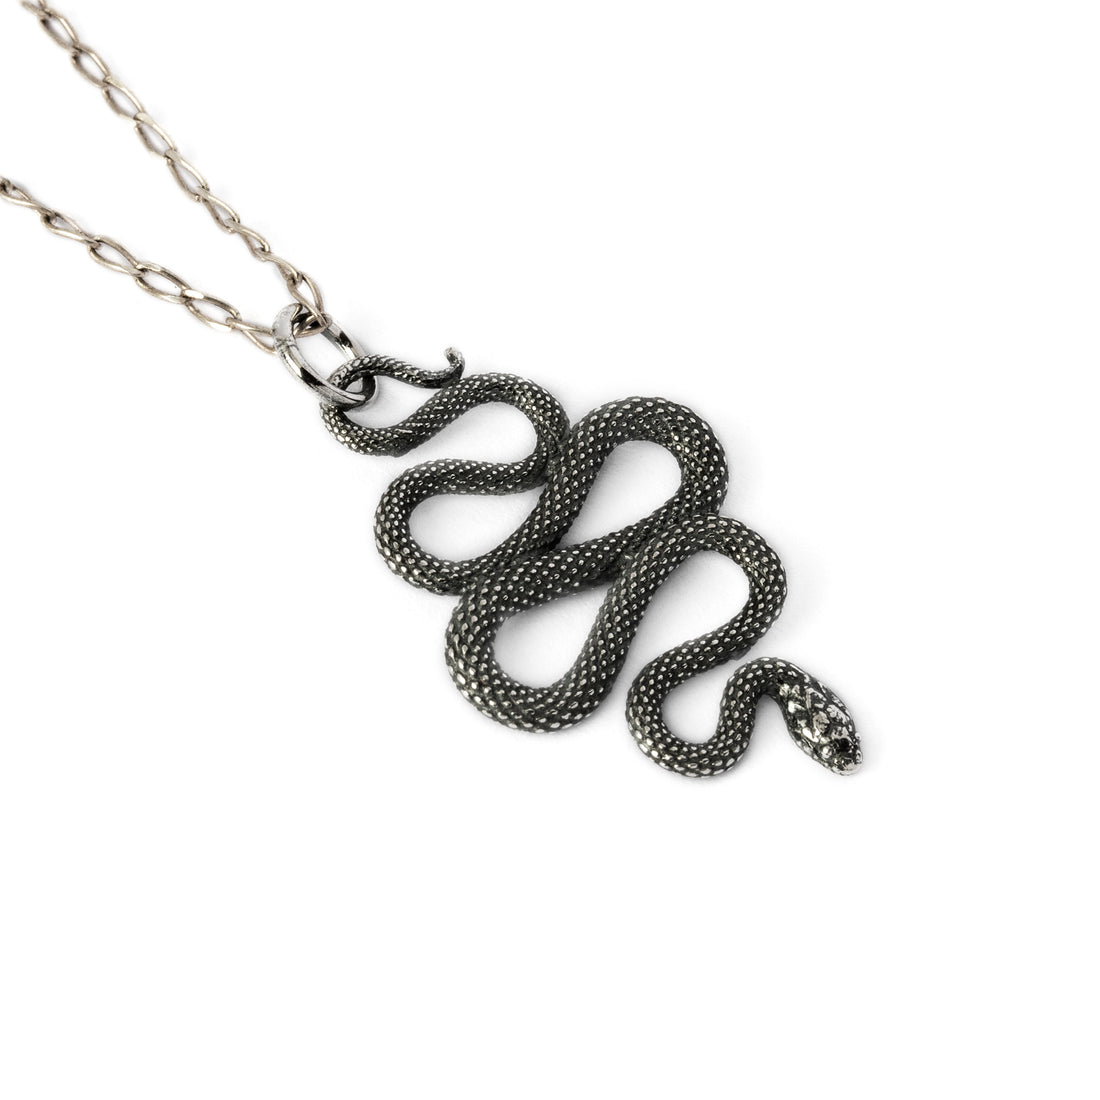 Eden Snake Silver Charm right side view